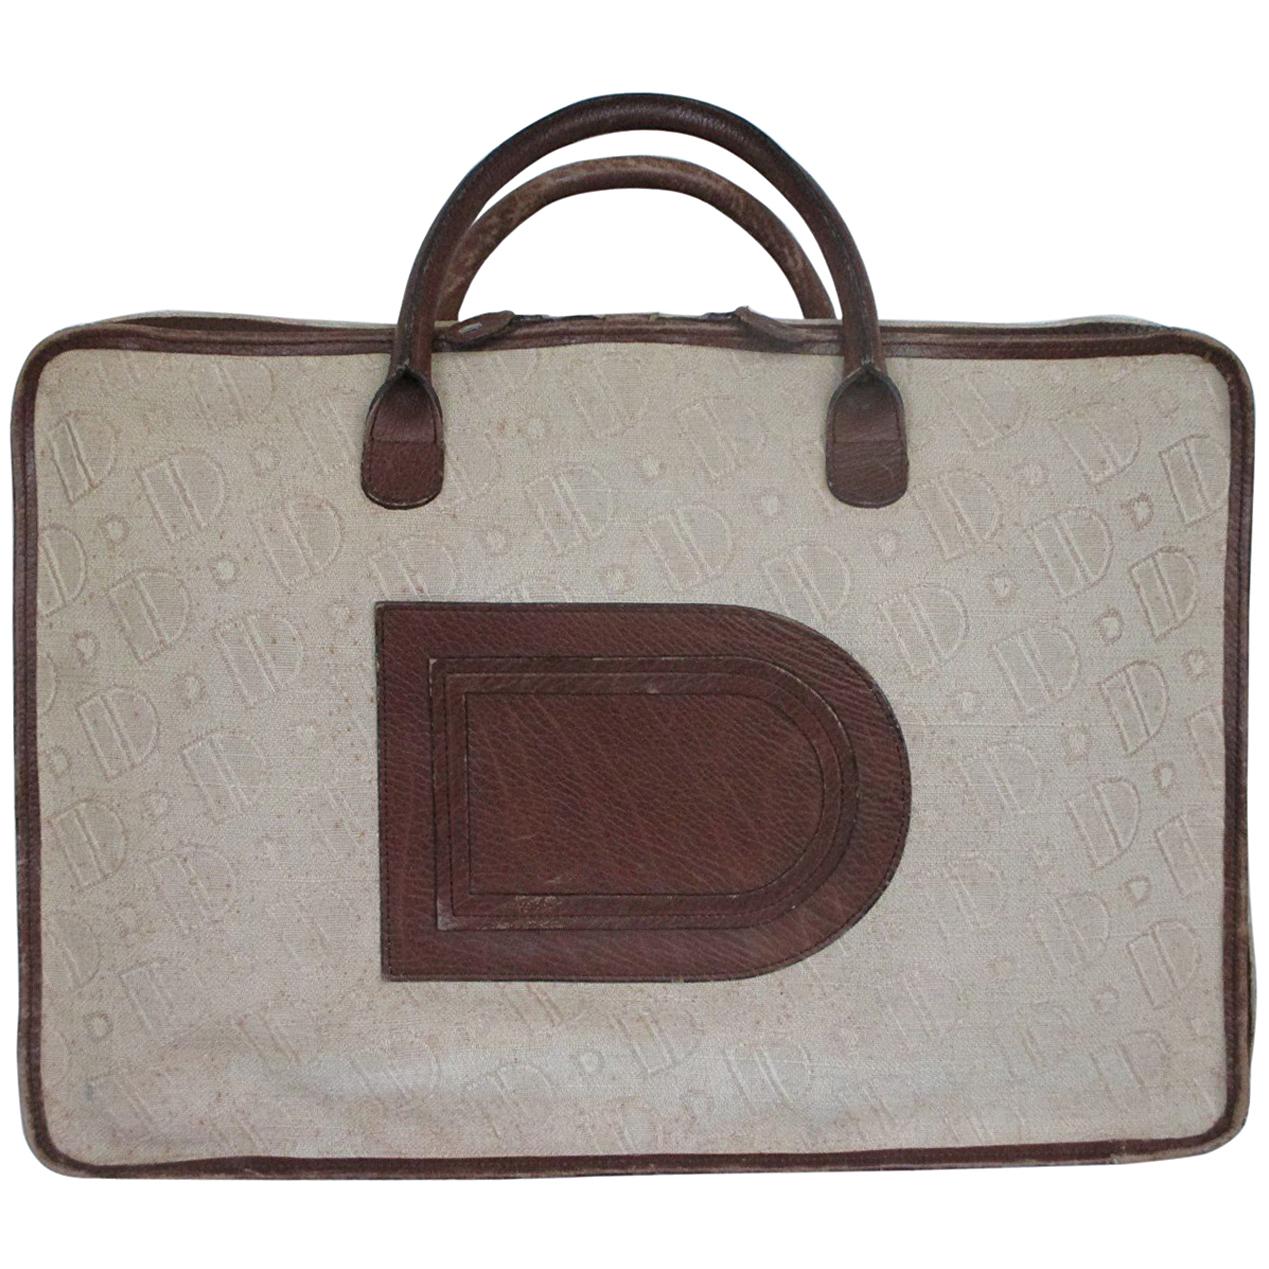 Vintage Delvaux Bags - 4 For Sale on 1stDibs | delvaux amsterdam